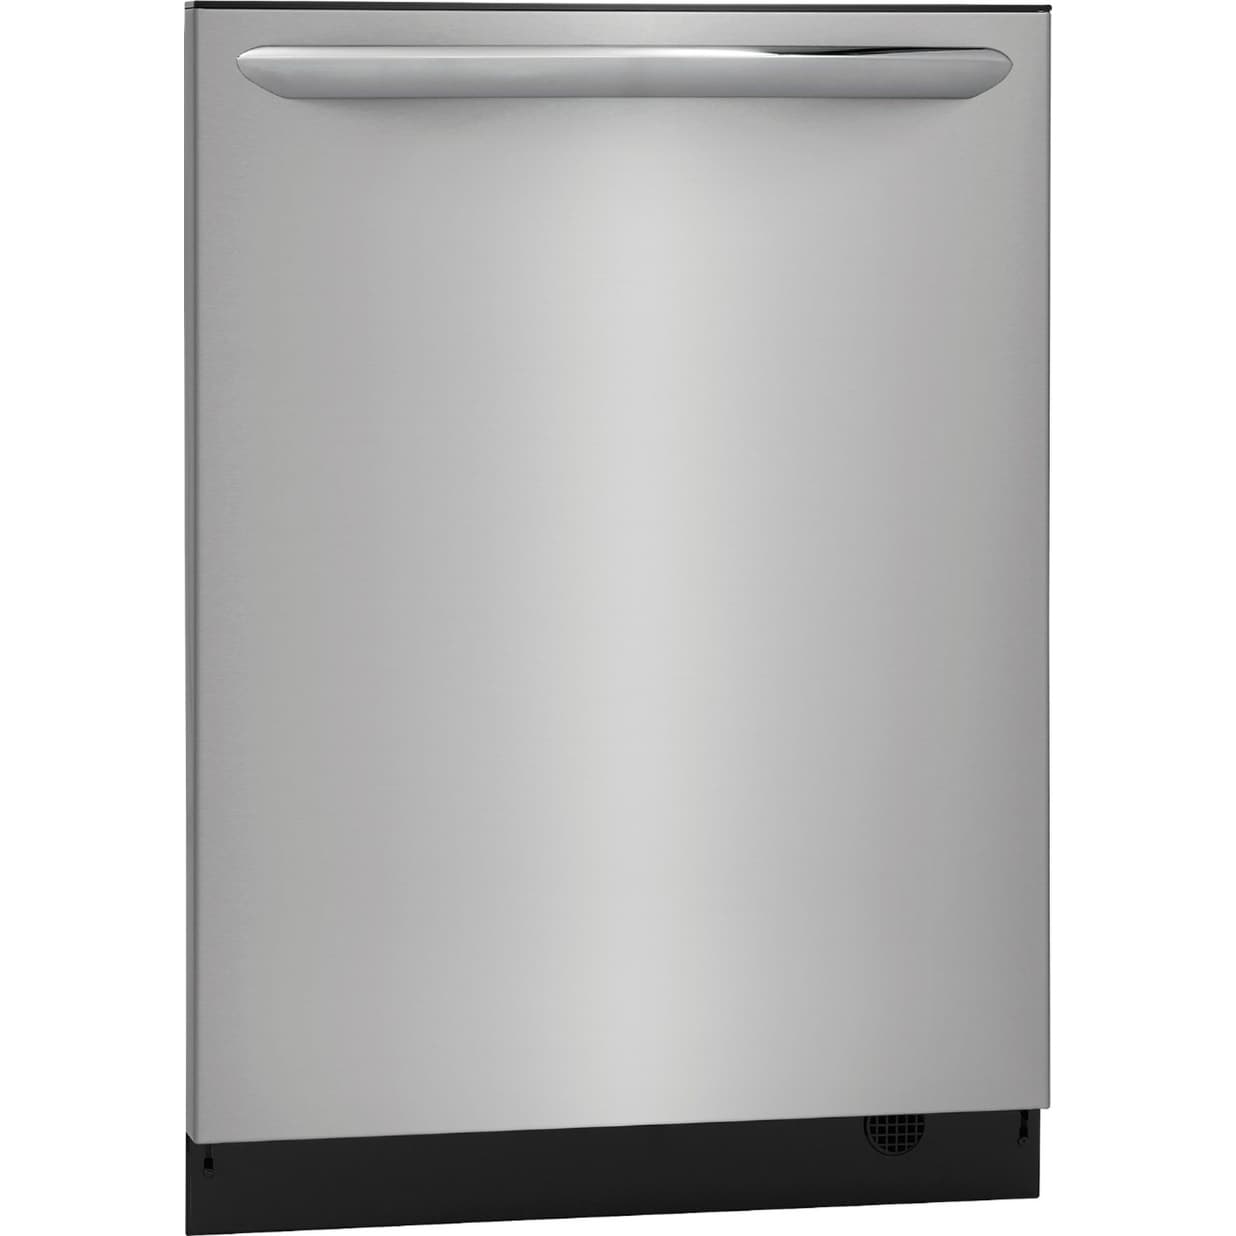 Frigidaire : Gallery Series Built-In 24 inch Dishwasher STAINLESS STEEL